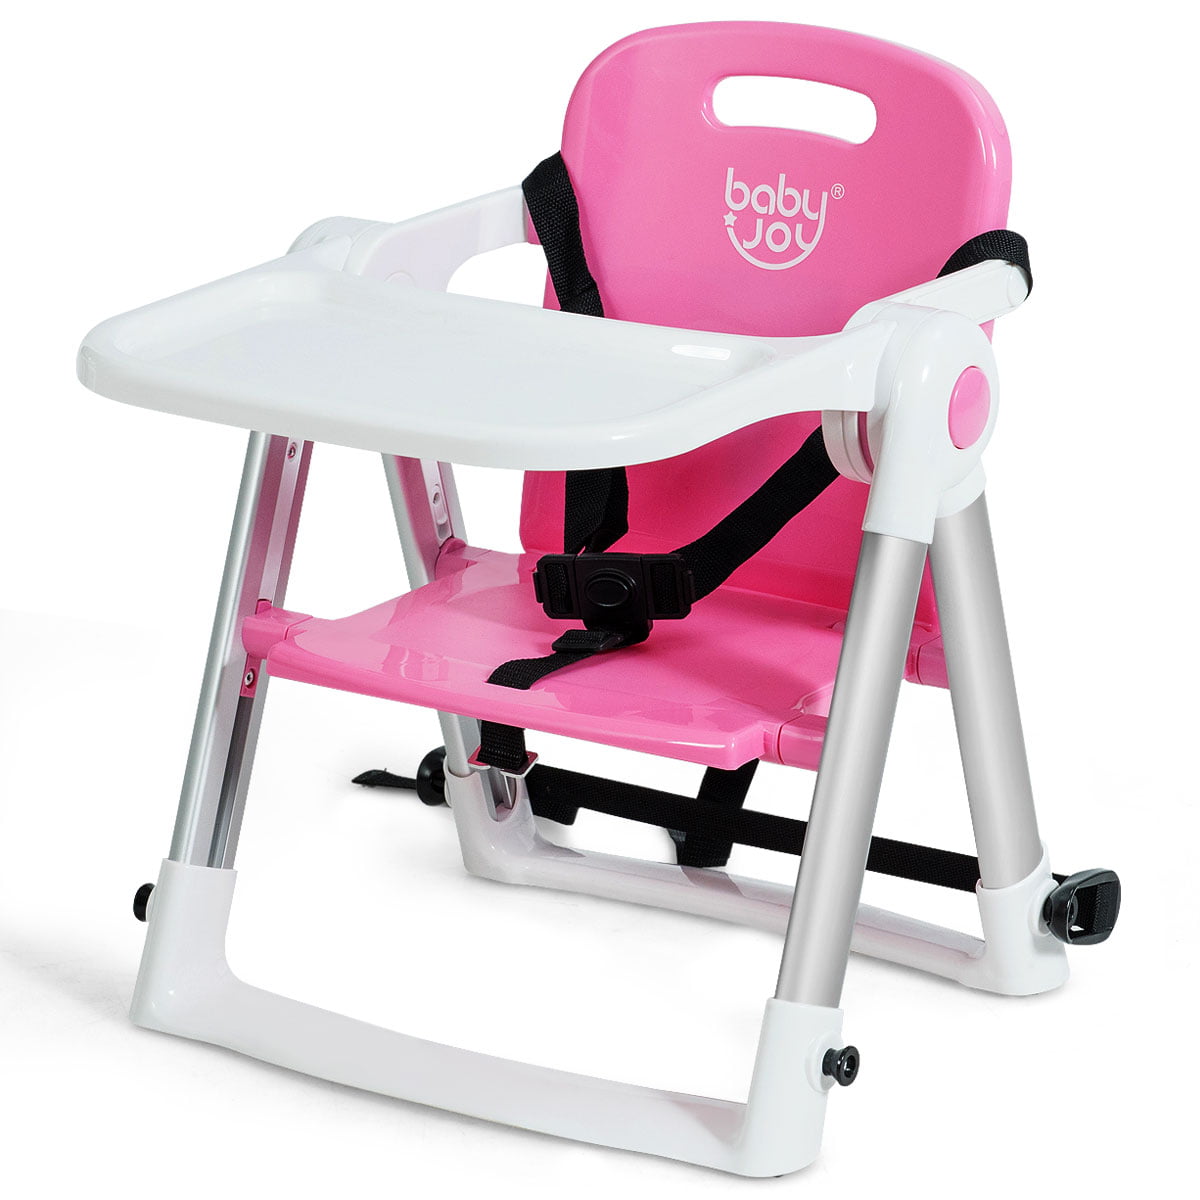 Baby High Chair Safety Belt Adjustable Infant Seat Protector Security Trip Strap 